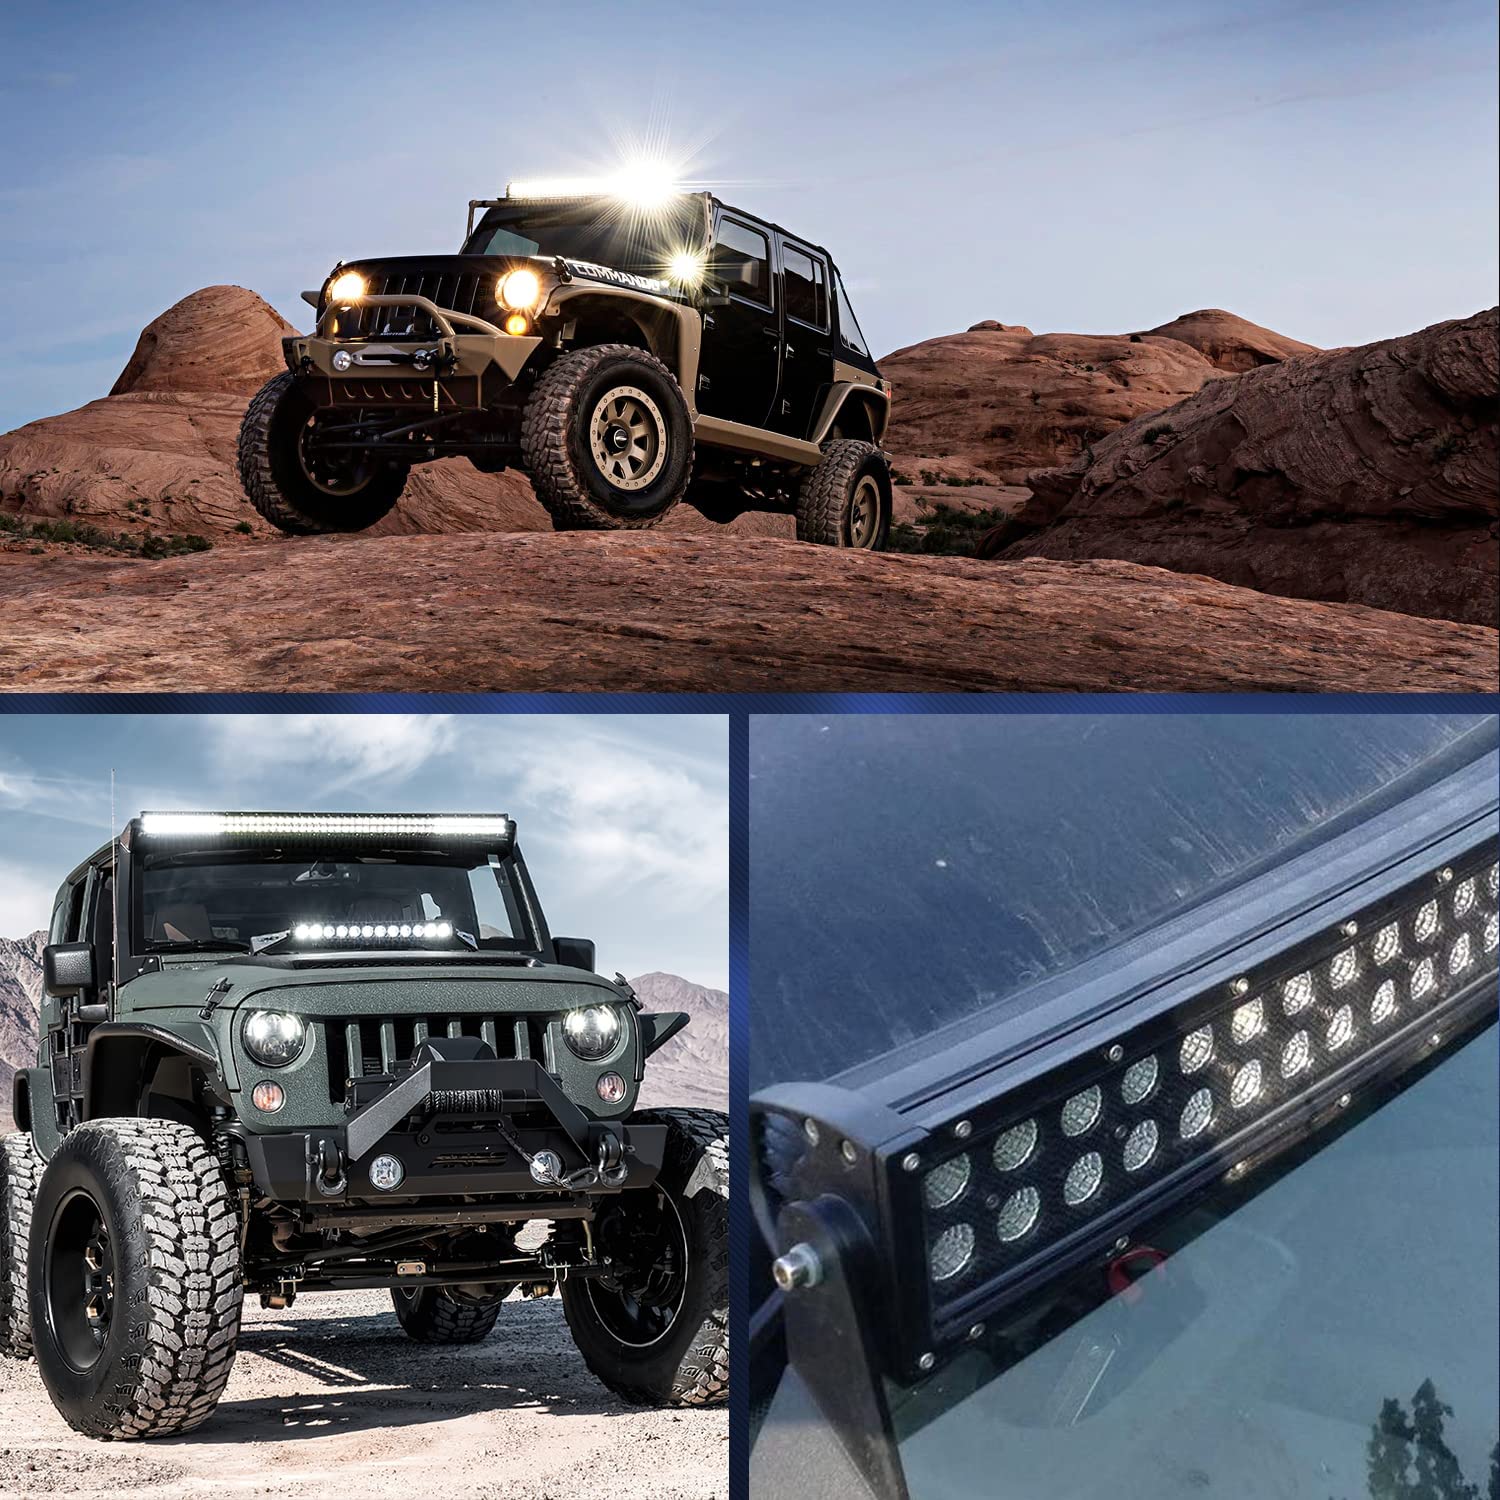 Willpower 32 Inch 180W Curved Led Light Bars Spot Flood Combo Slim Led Bar  with Wiring Harness Offroad Driving Lights Work Fog Lamps Lightbar for